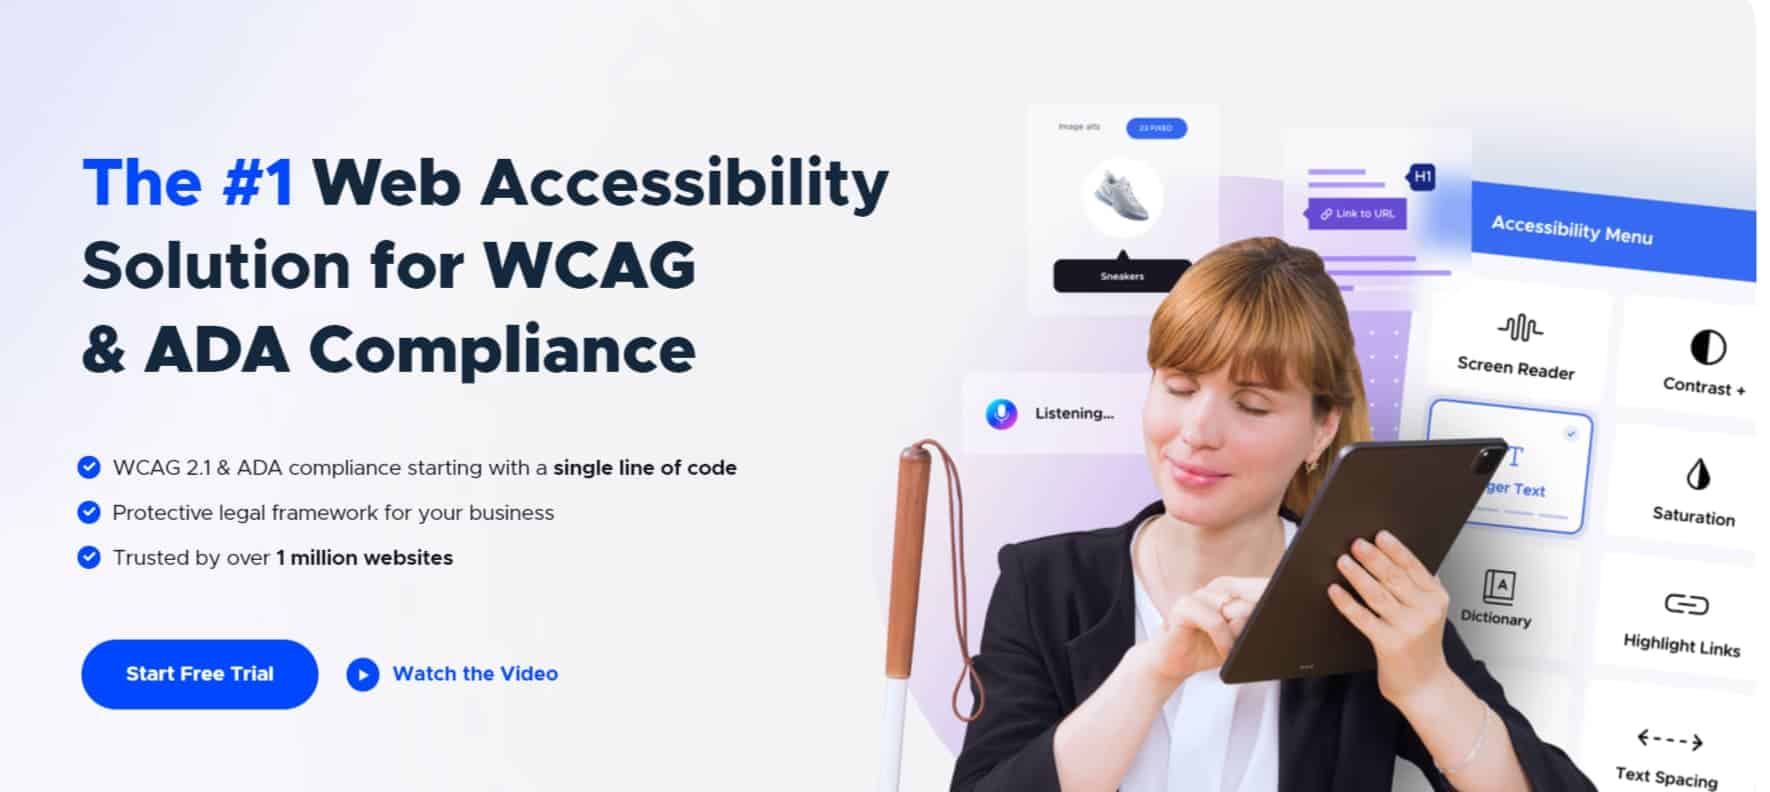 UserWay - The Leading AI-Powered Web Accessibility Solution - userway.org